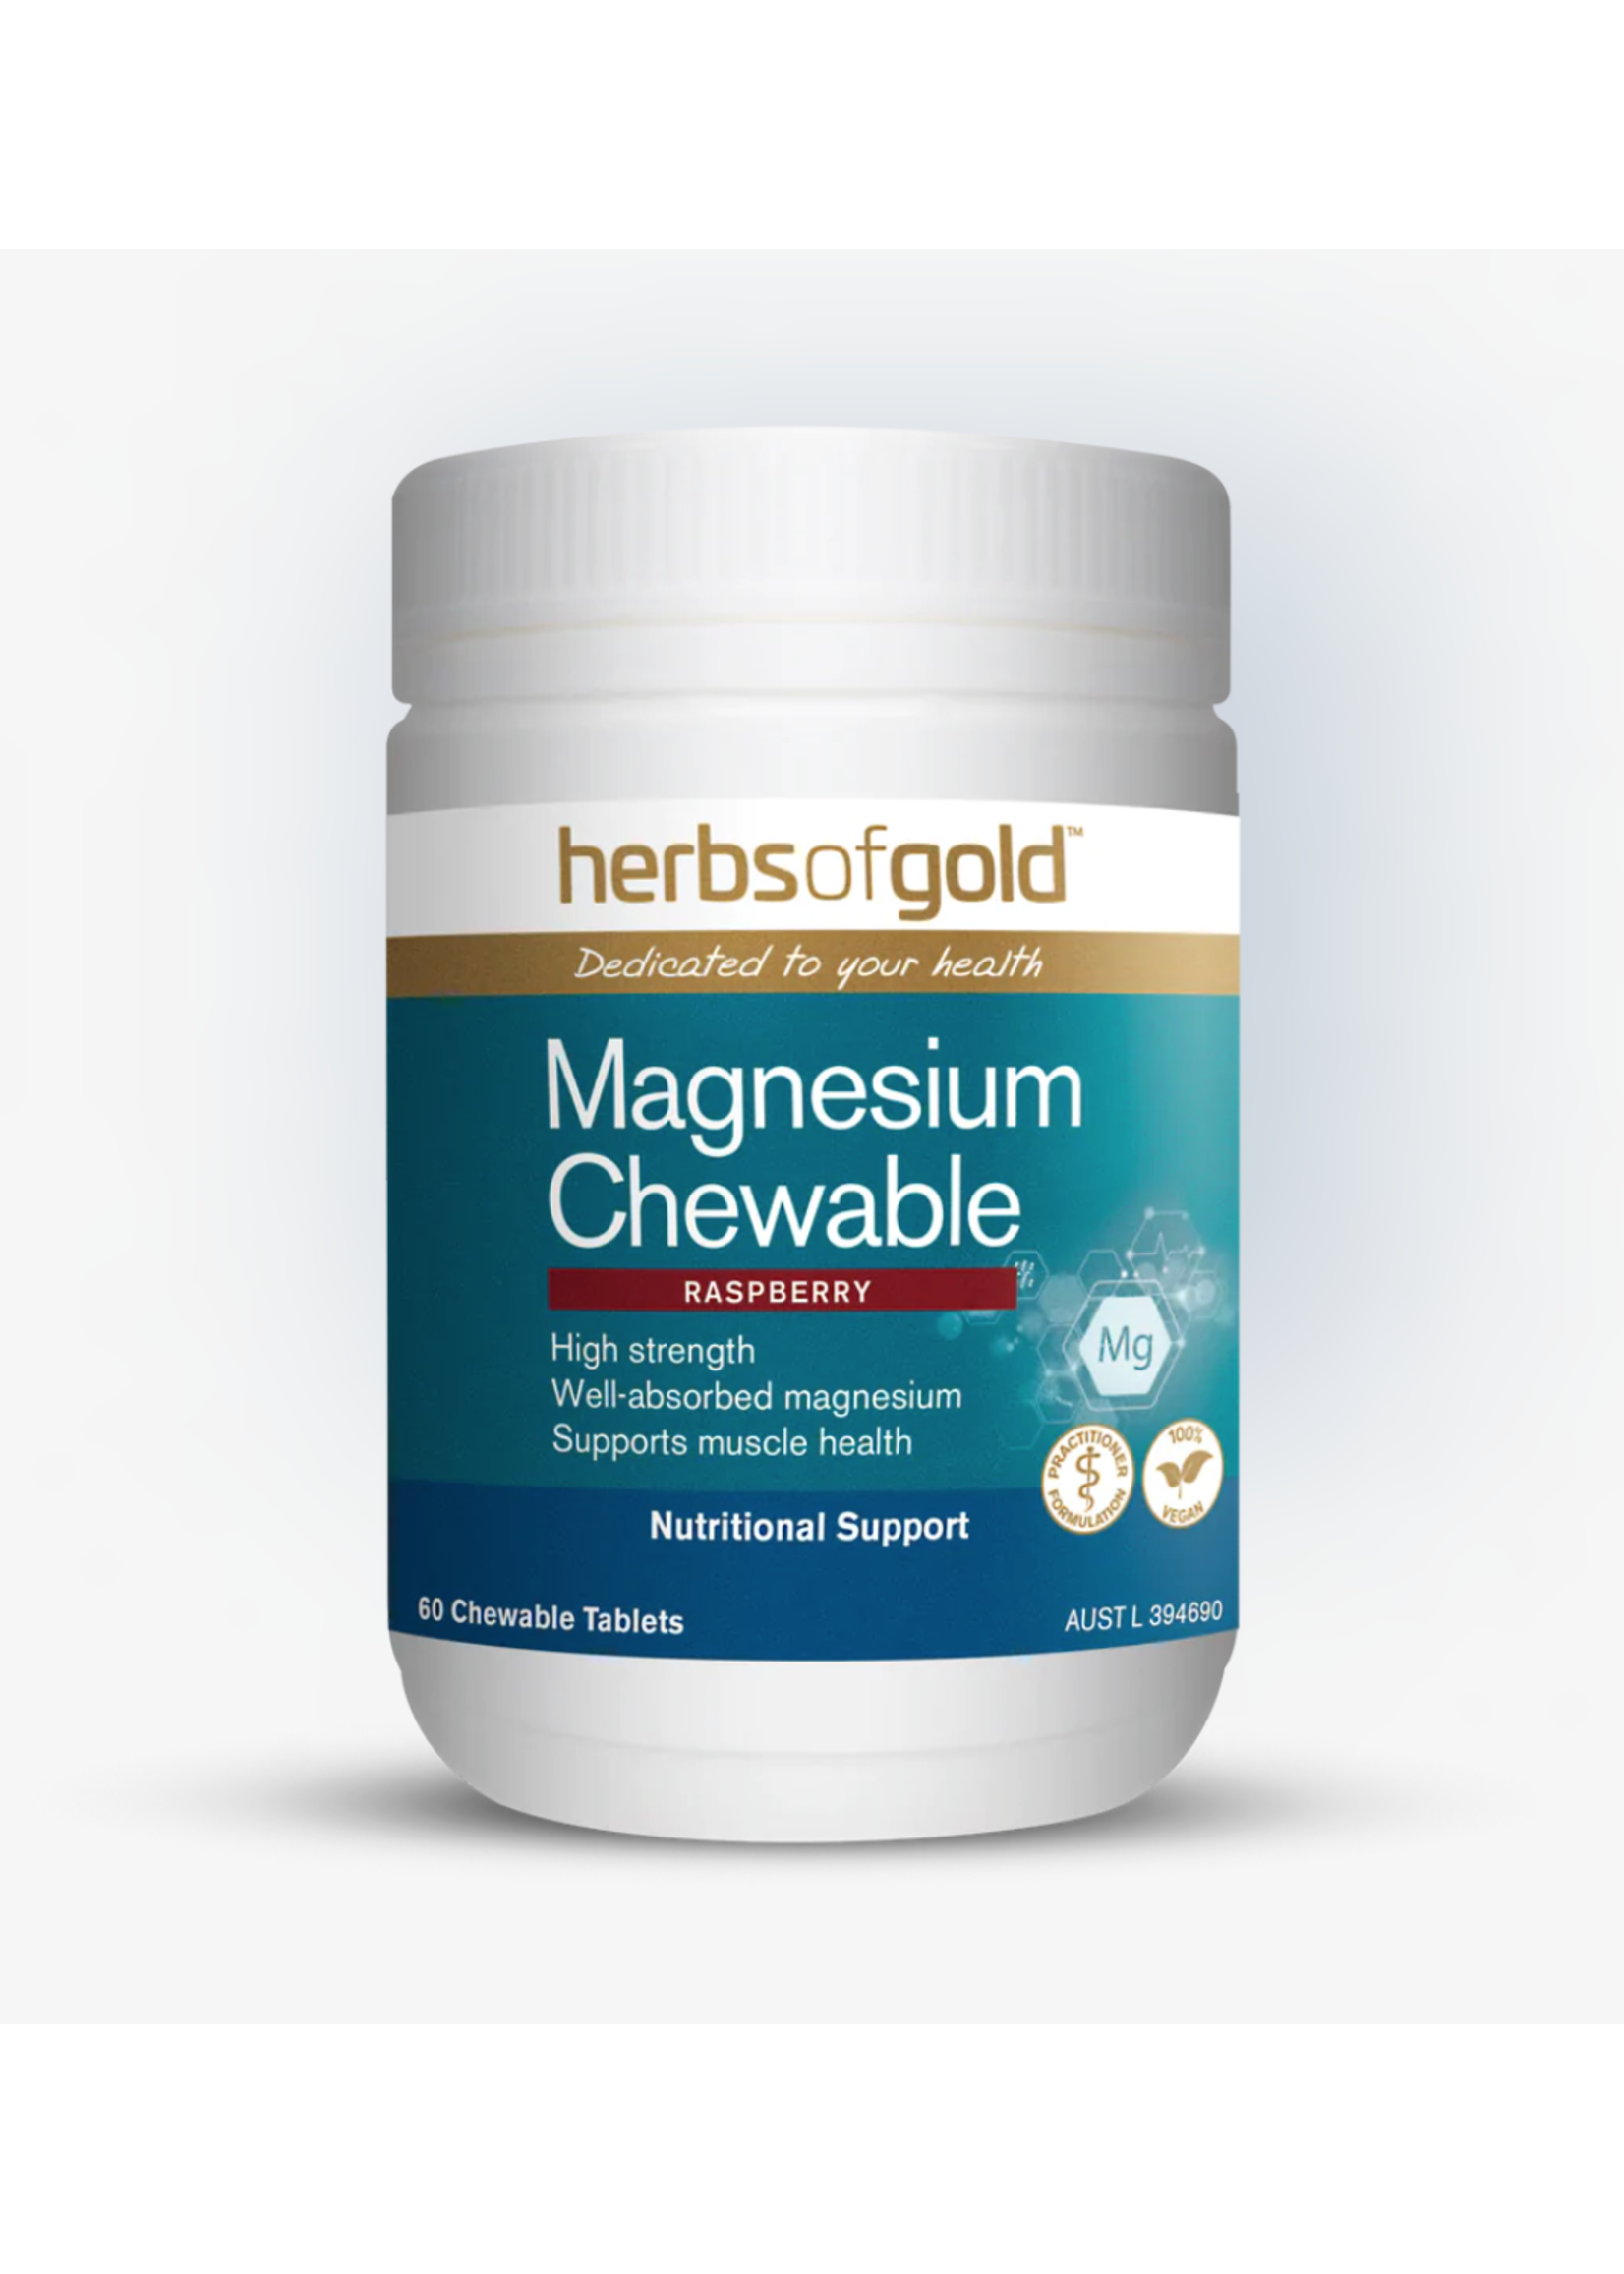 Herbs of Gold Herbs of Gold Magnesium Chewable Raspberry 60 tablets